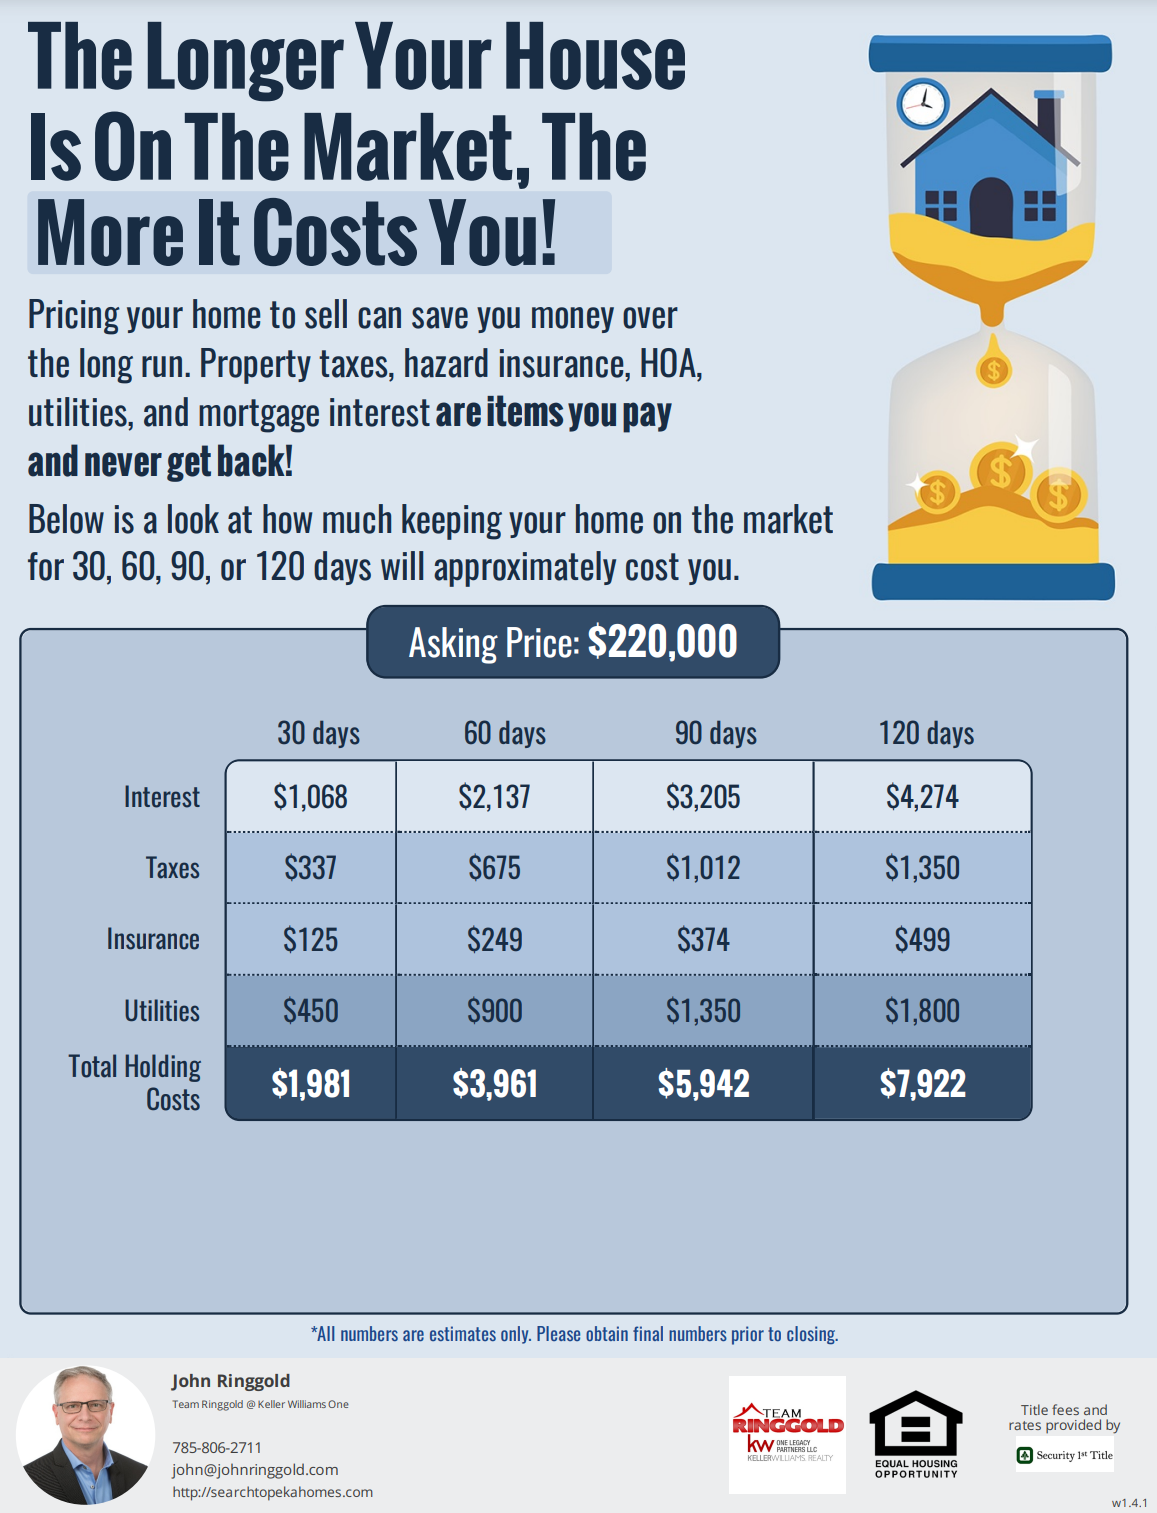 The longer your house is on the market, the more it costs you!